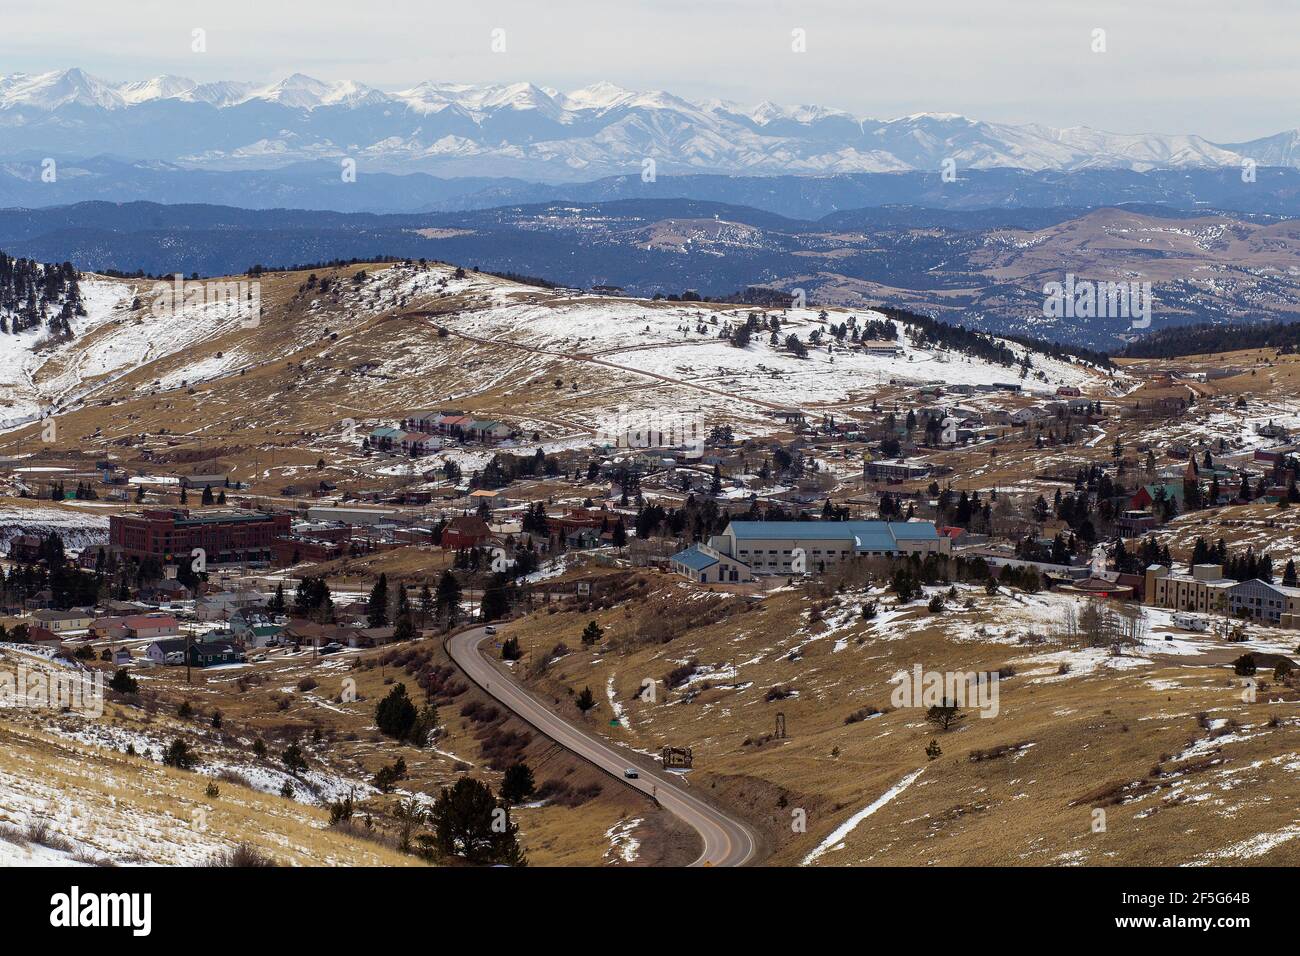 Cripple Creek Colorado a tourist town with many casinos was the site of the greatest mining boom in Colorado. Stock Photo